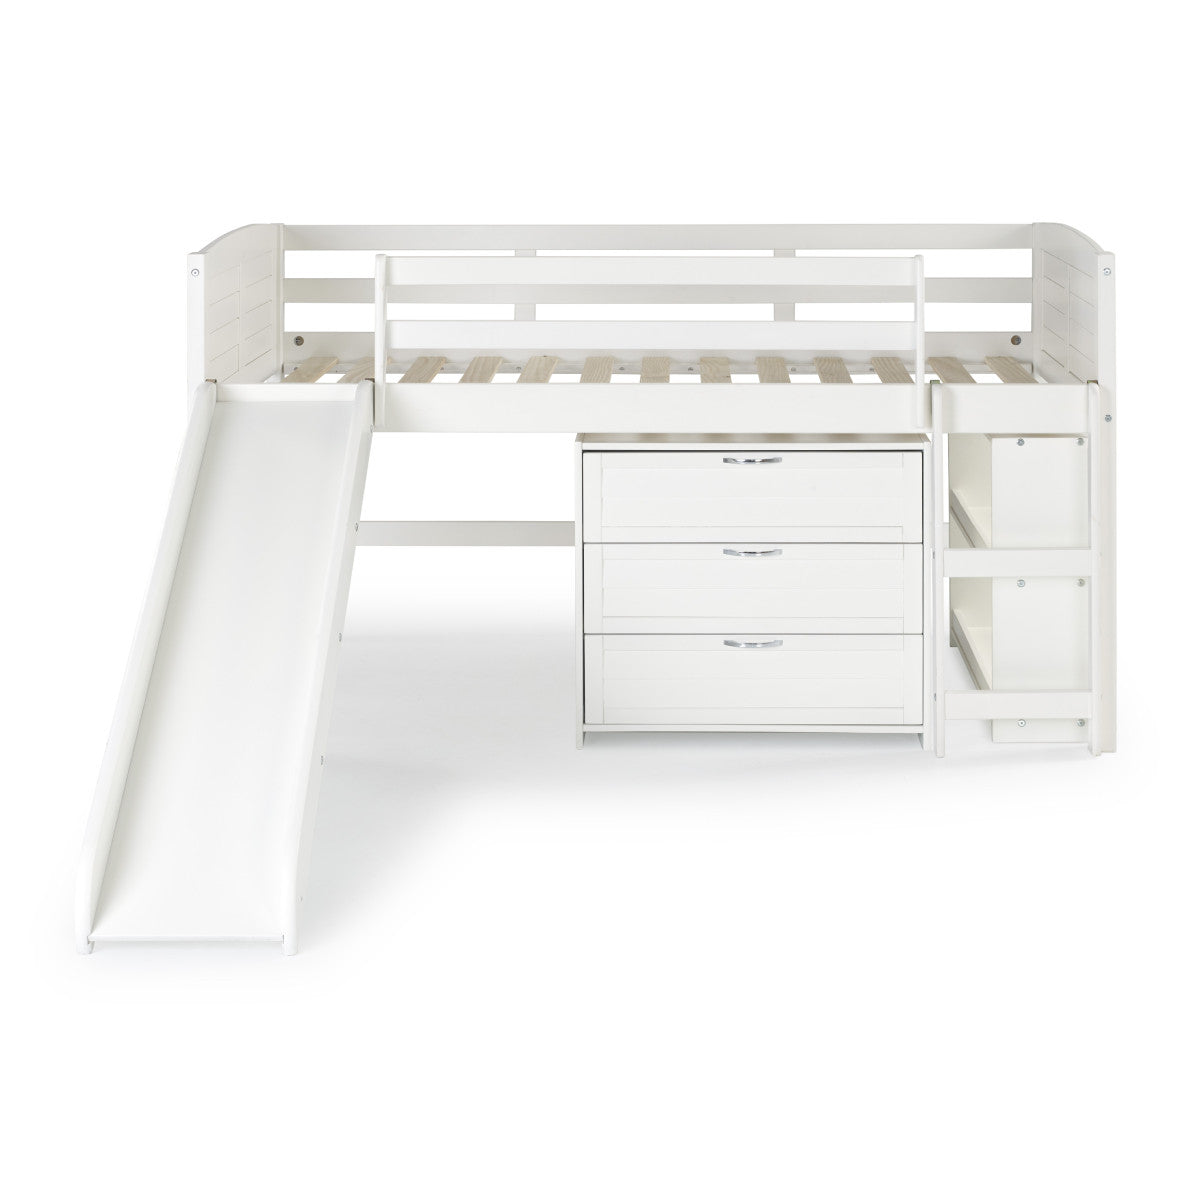 TWIN LOUVER LOW LOFT W/SLIDE IN WHITE FINISH GROUP C